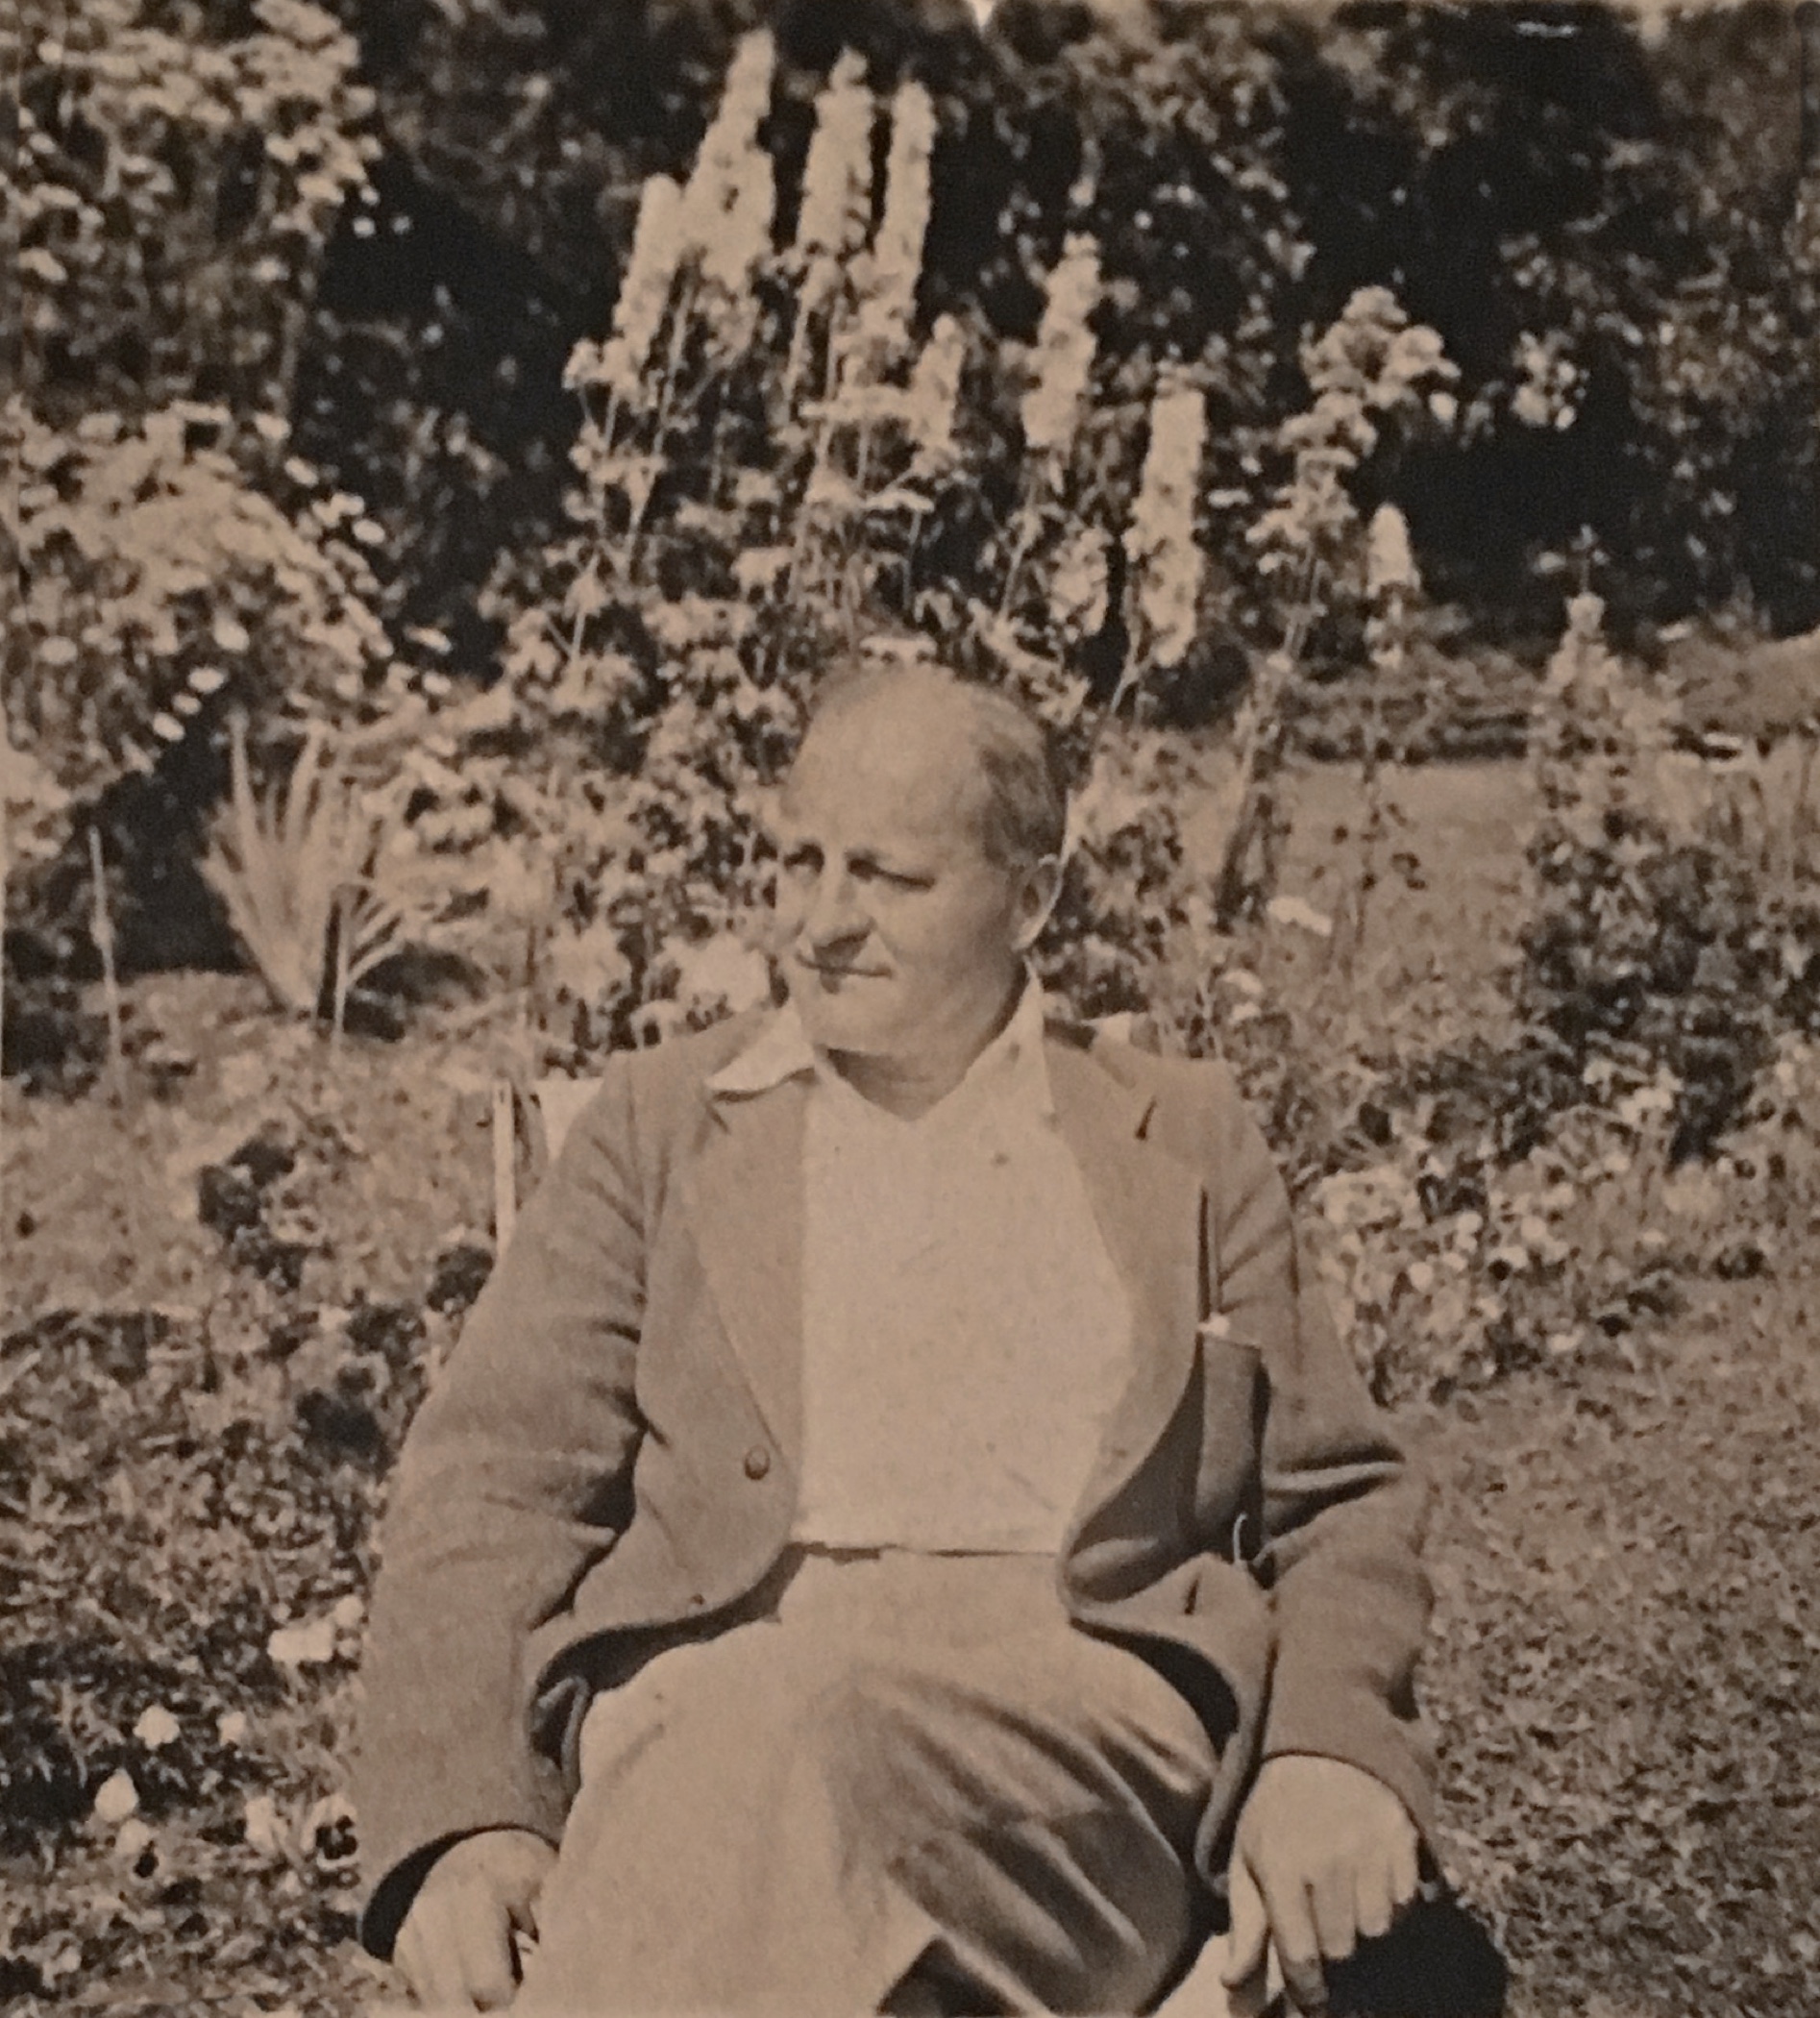 Sepia-toned photo of a middle-aged gentleman, Sir Herbert Symington, sitting on a chair outdoors with garden flowers (delphiniums) behind him.